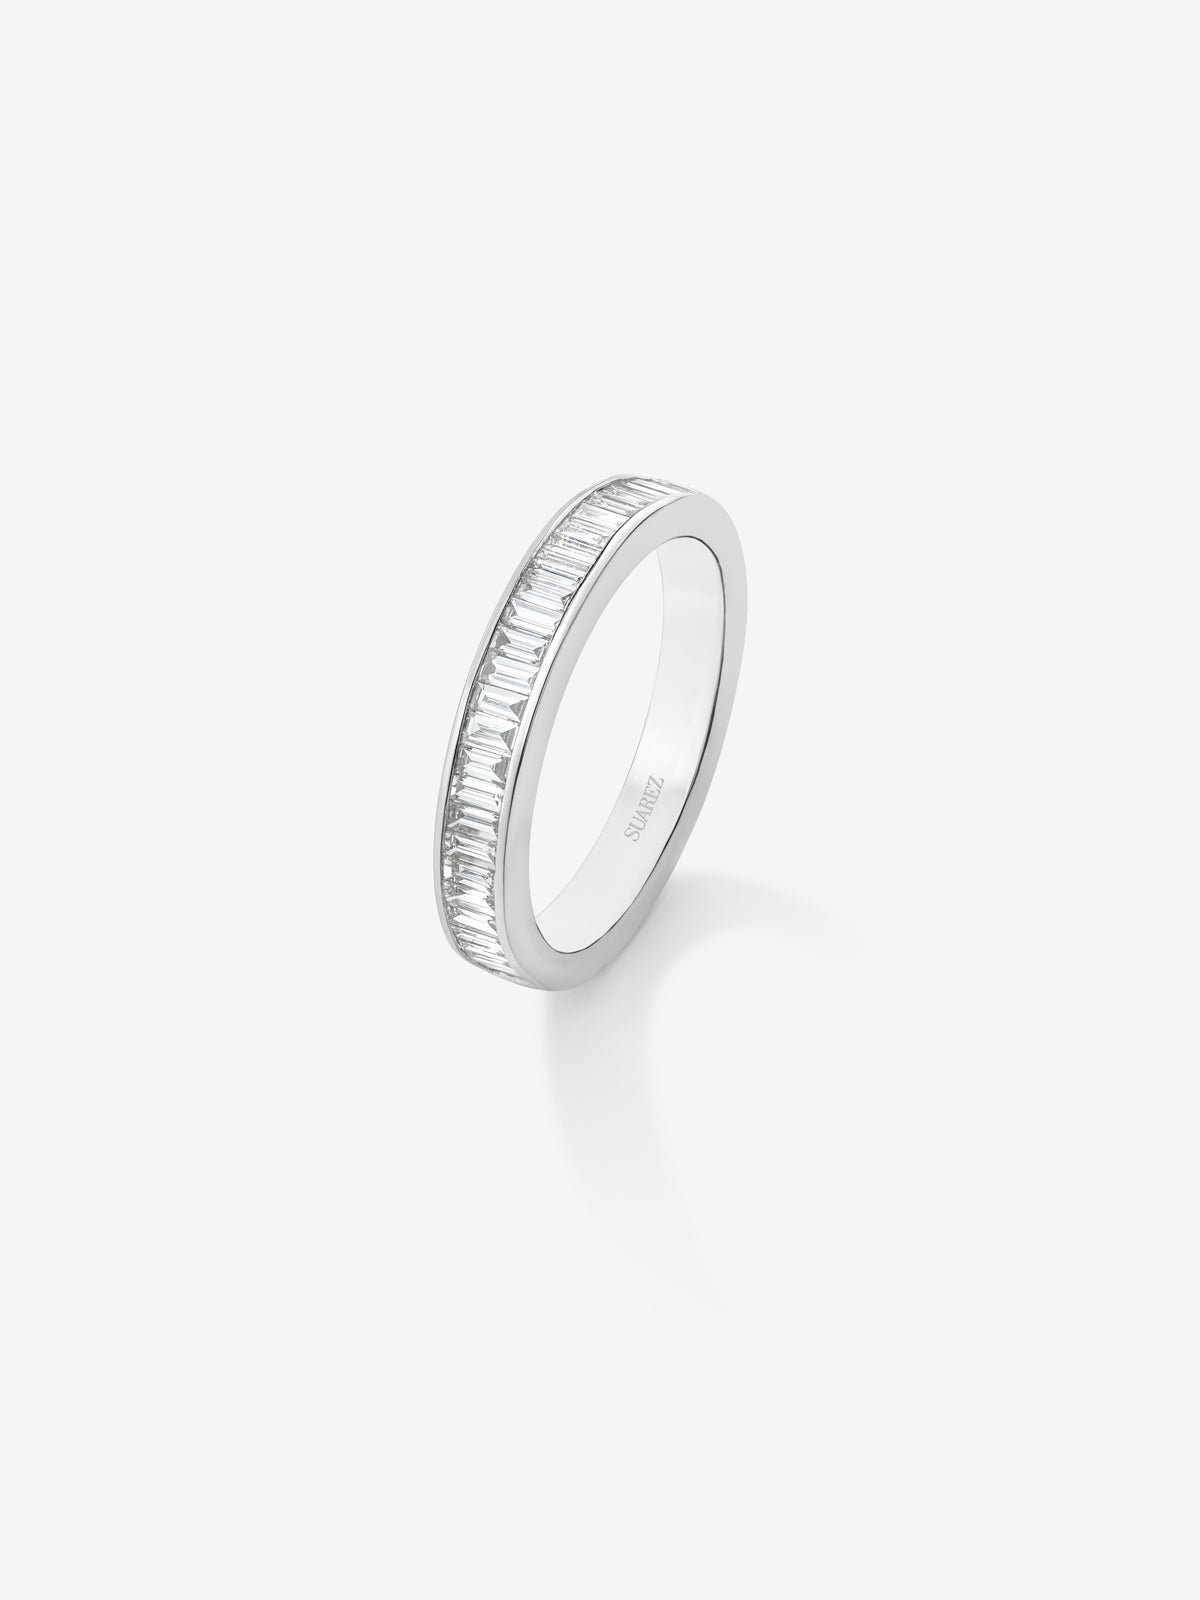 Half ring in 18K white gold with 31 baguette-cut diamonds with a total of 0.5 cts